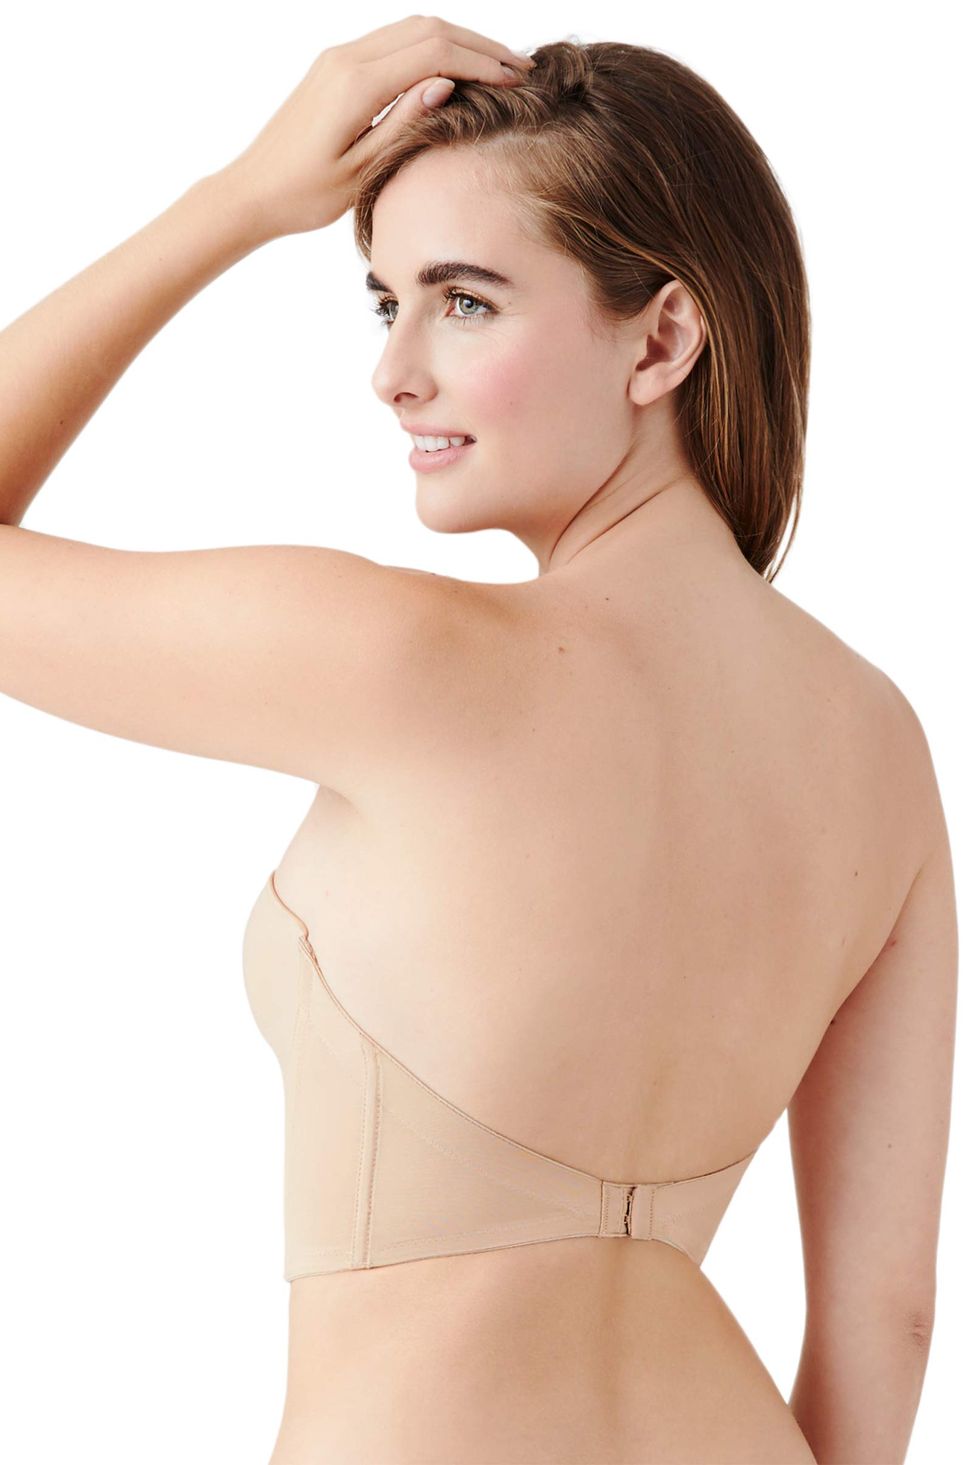 10 best backless bras 2023 for backless and low black clothes